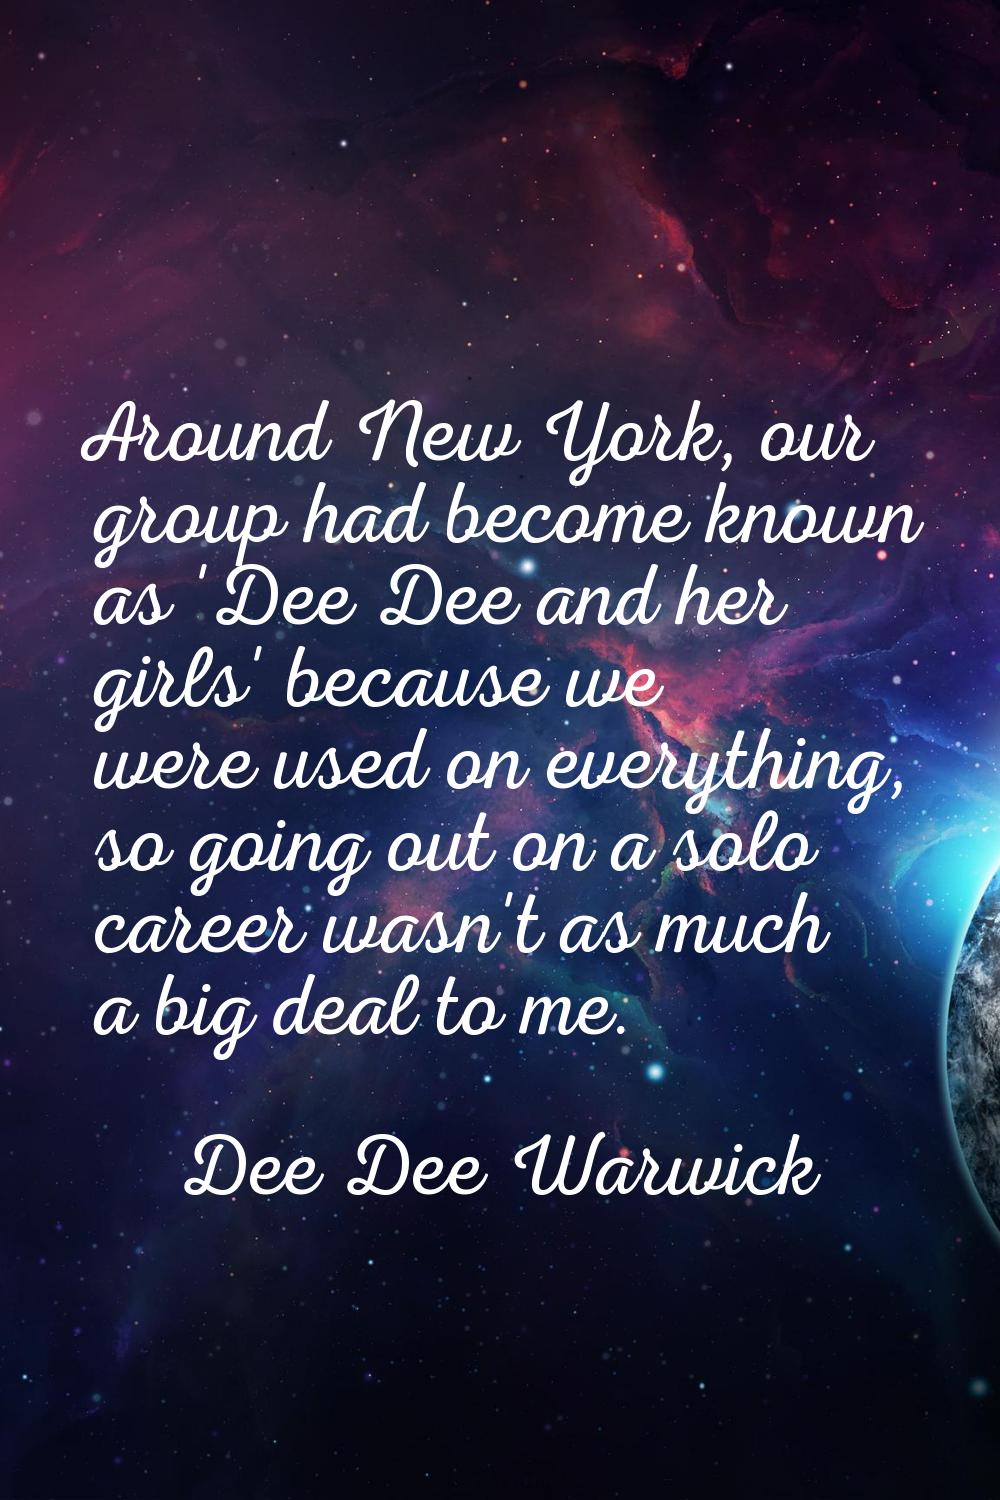 Around New York, our group had become known as 'Dee Dee and her girls' because we were used on ever